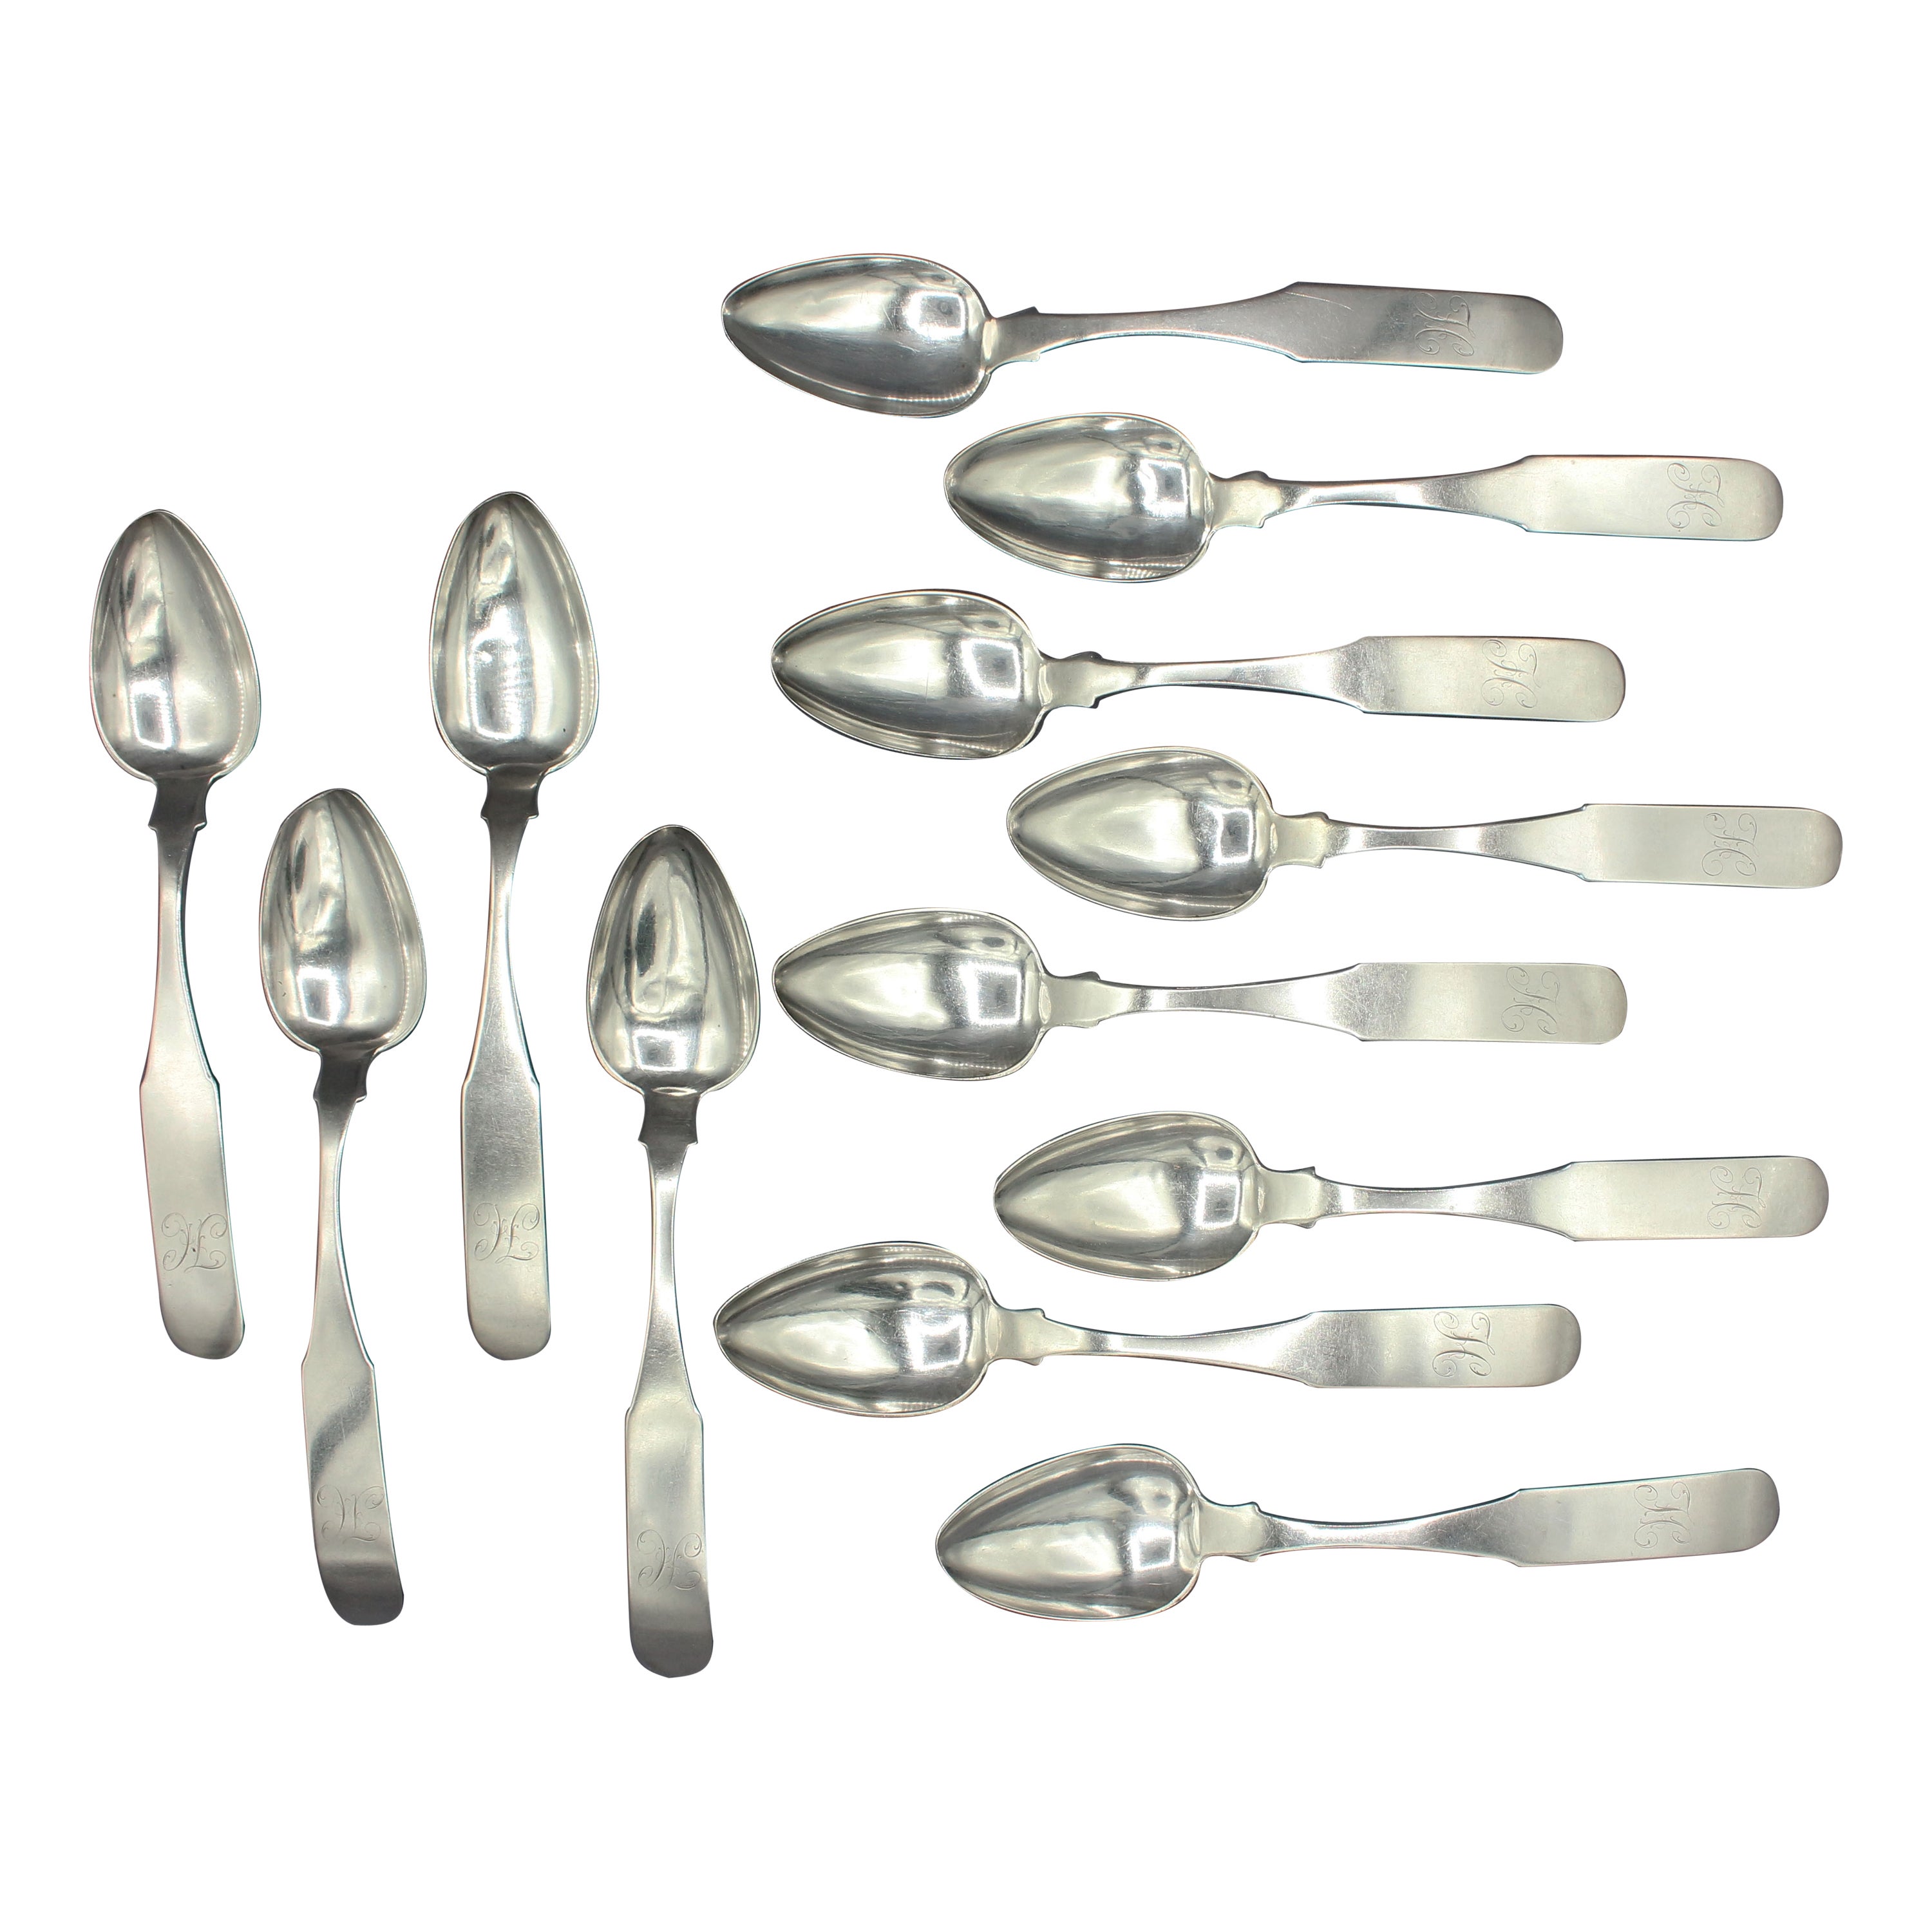 Set of 12 1816 Coin Silver Tablespoons by John Erwin